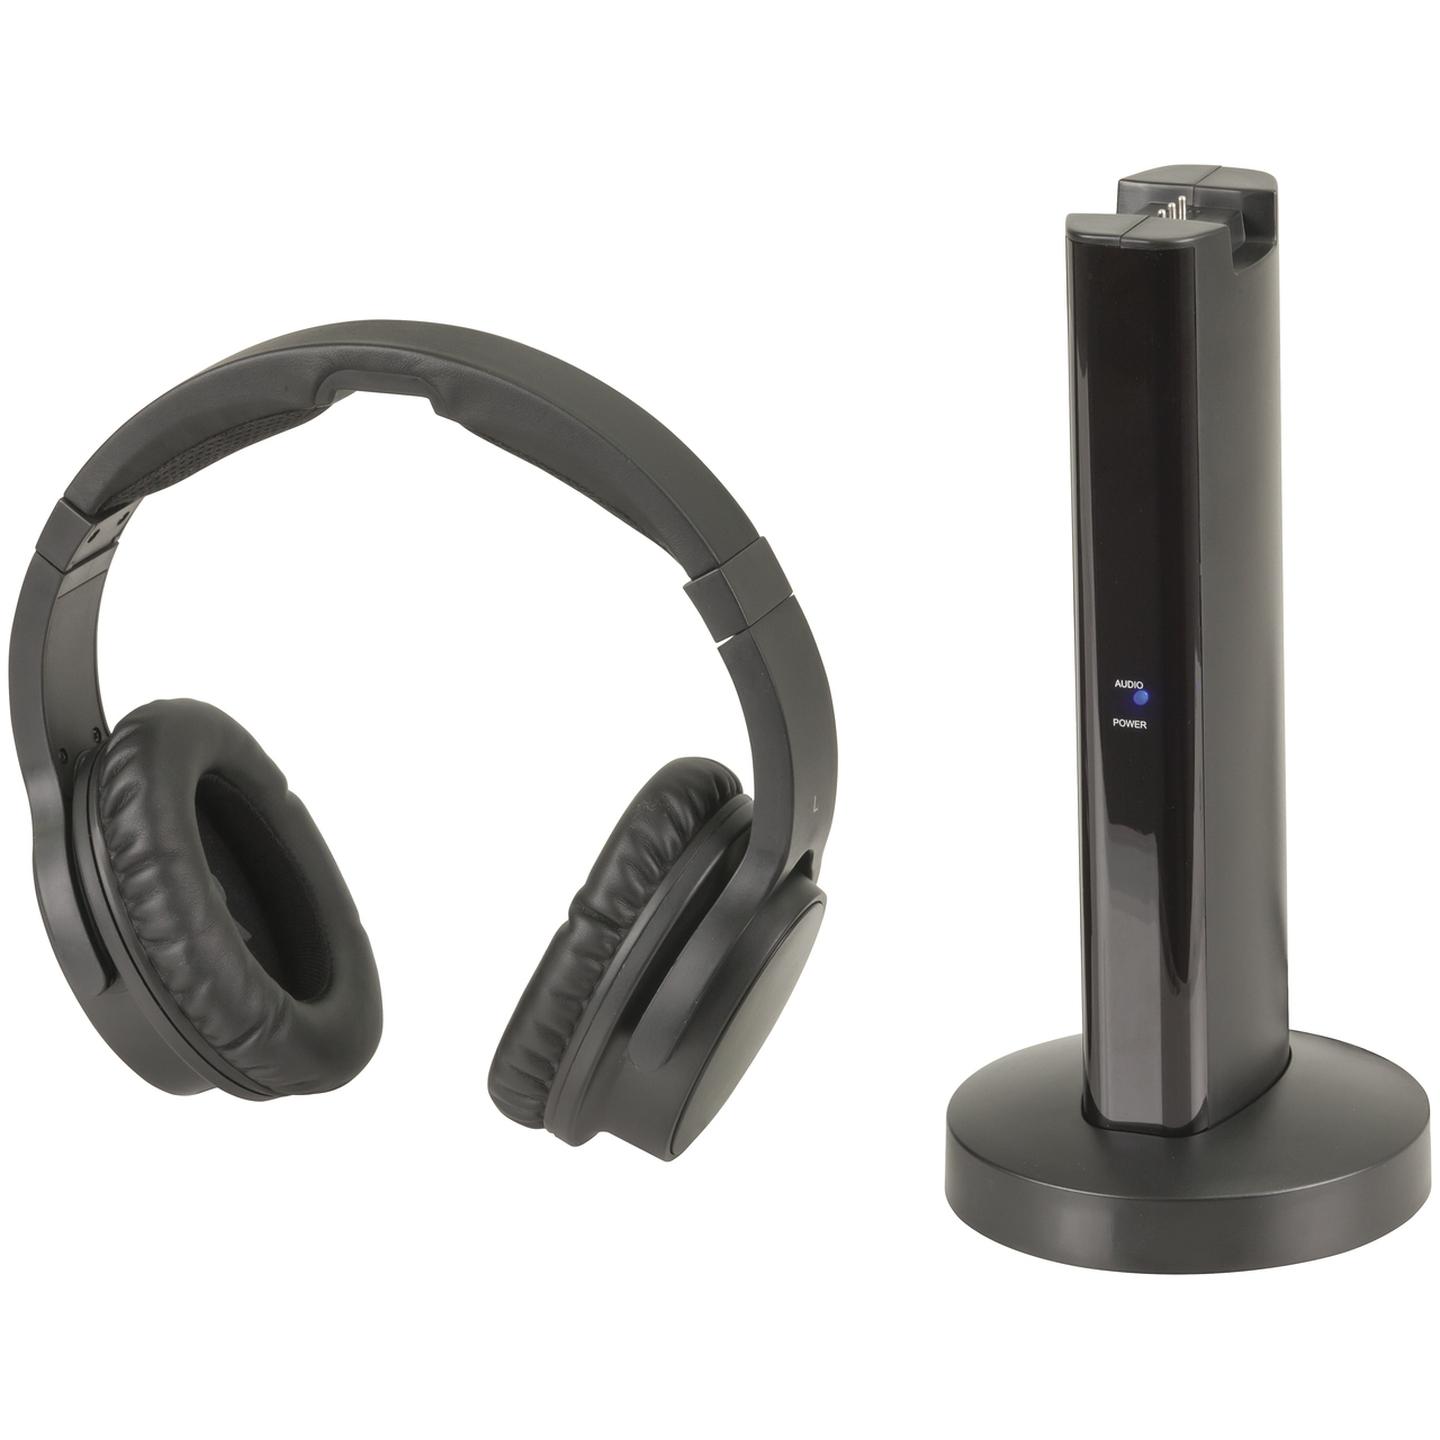 2.4GHz Wireless Rechargeable Stereo Headphones